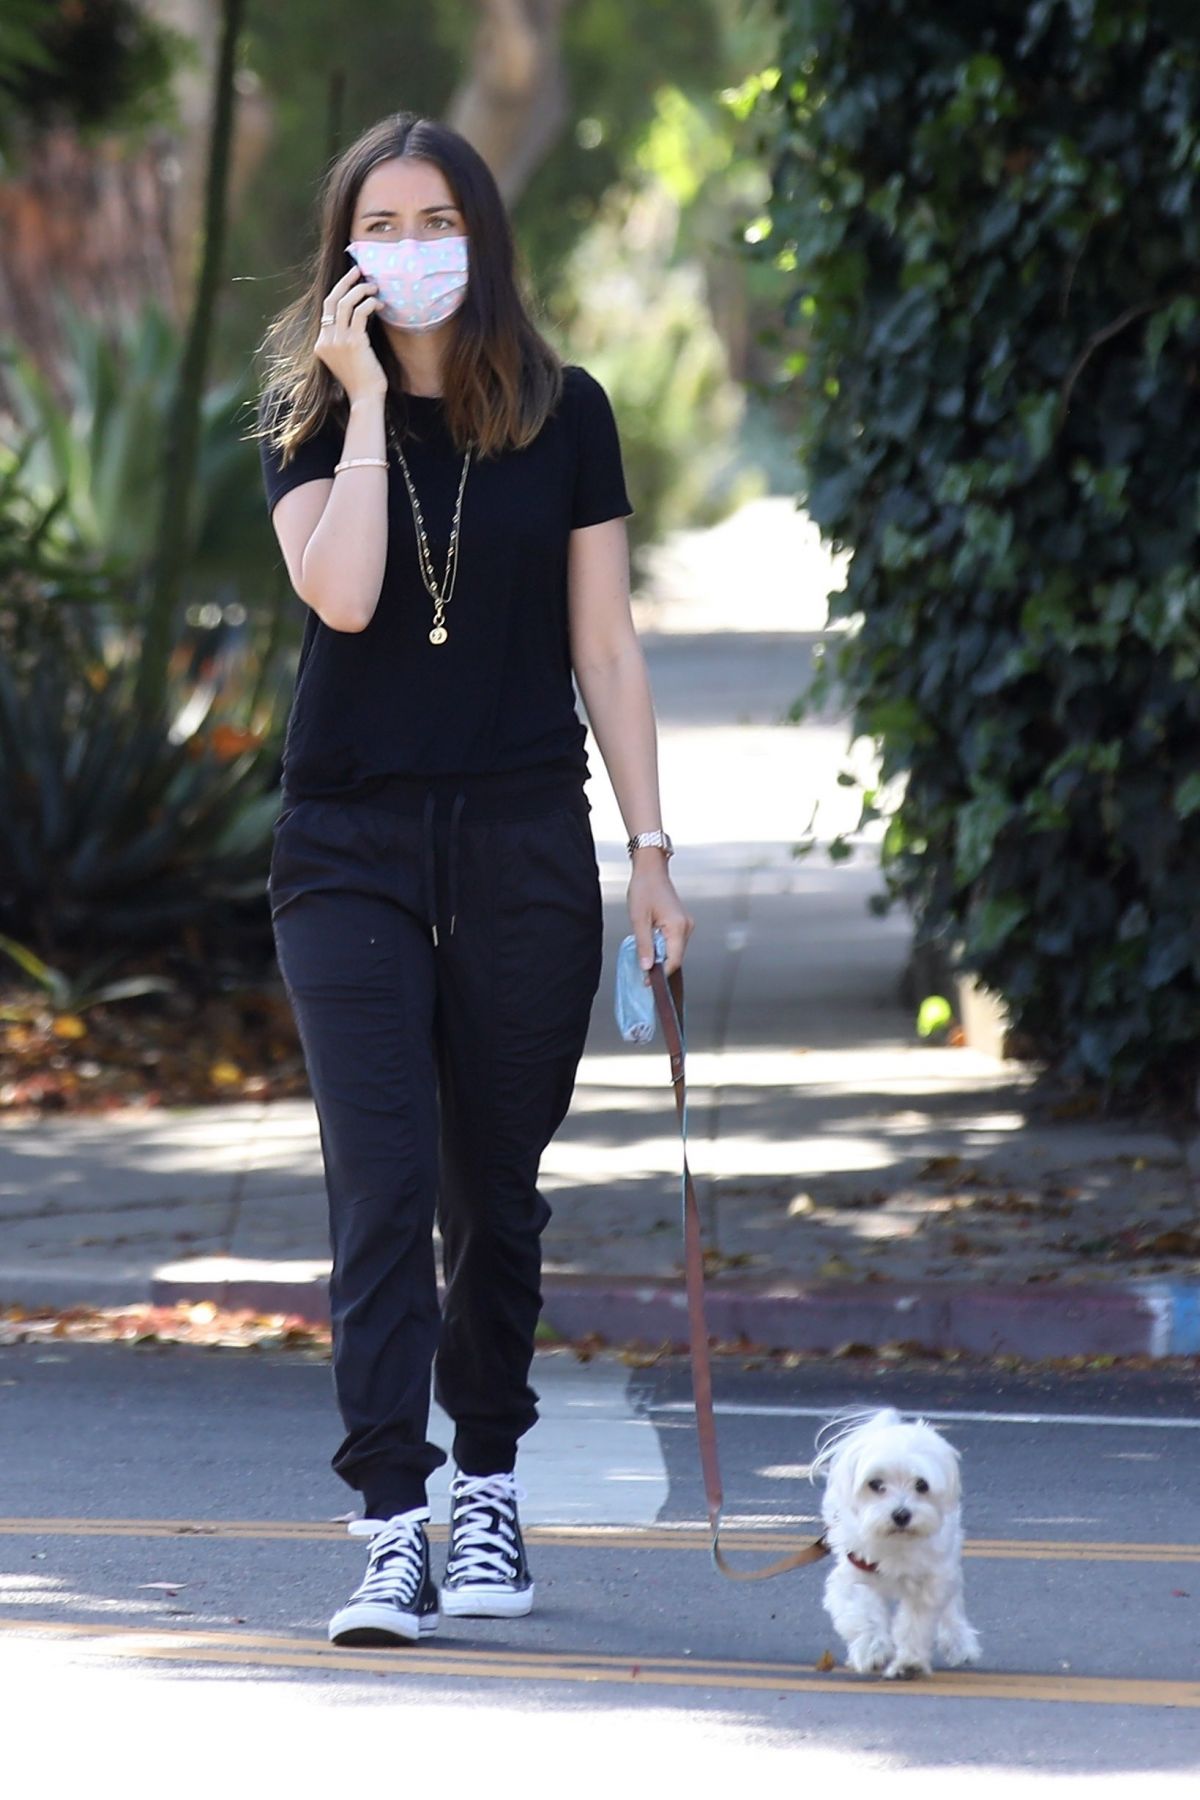 ANA DE ARMAS Out with Her Dog in Venice Beach 05/15/2020 – HawtCelebs